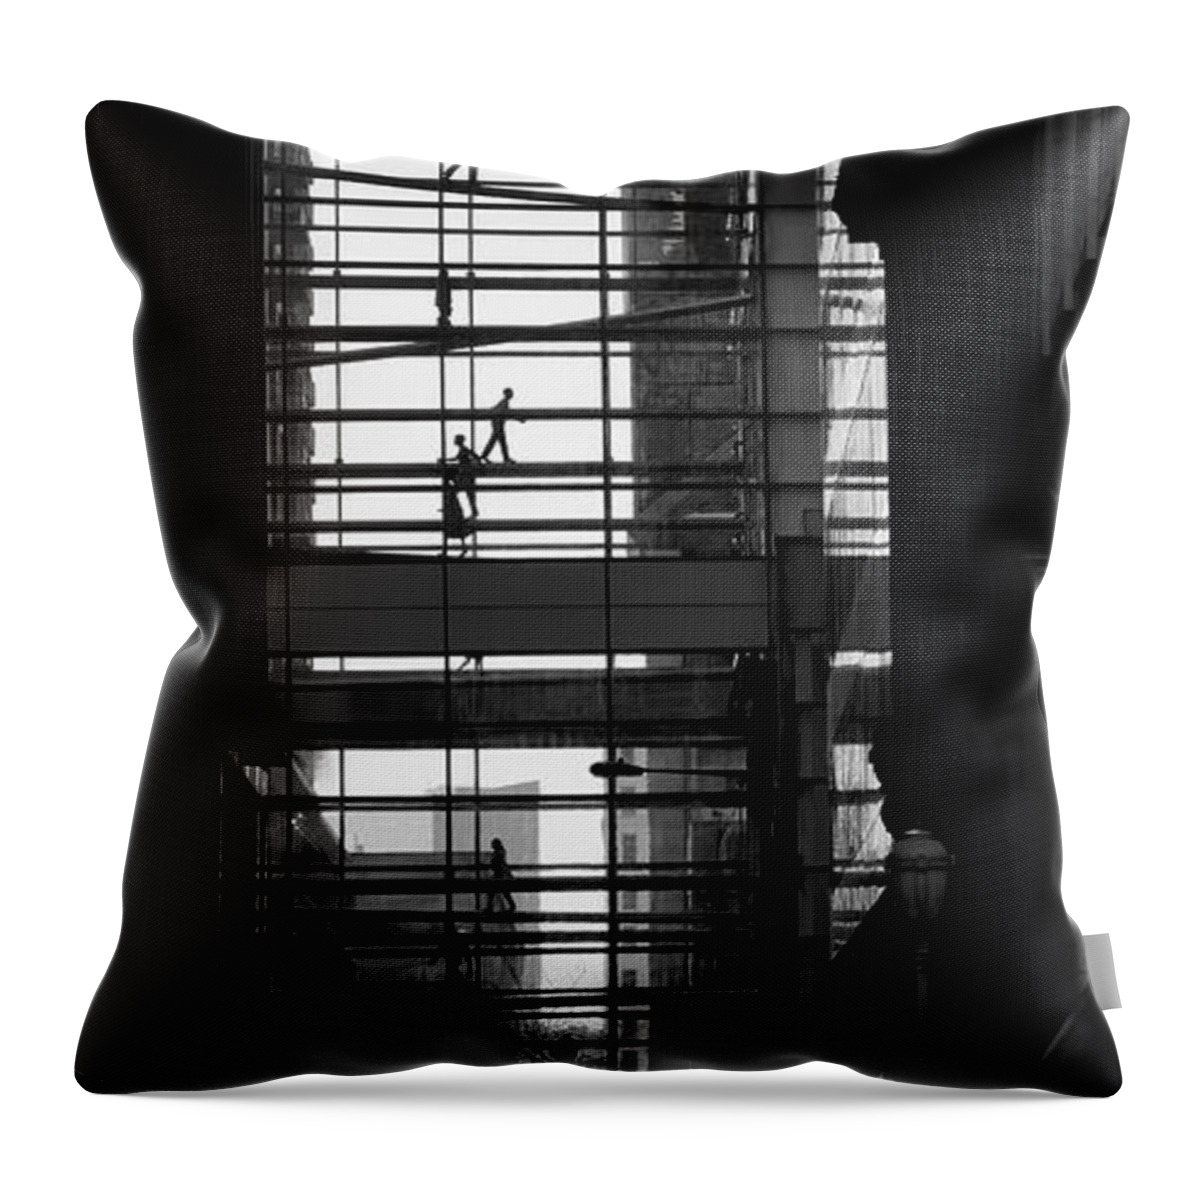 Concourse Throw Pillow featuring the photograph Walking by Marvin Spates